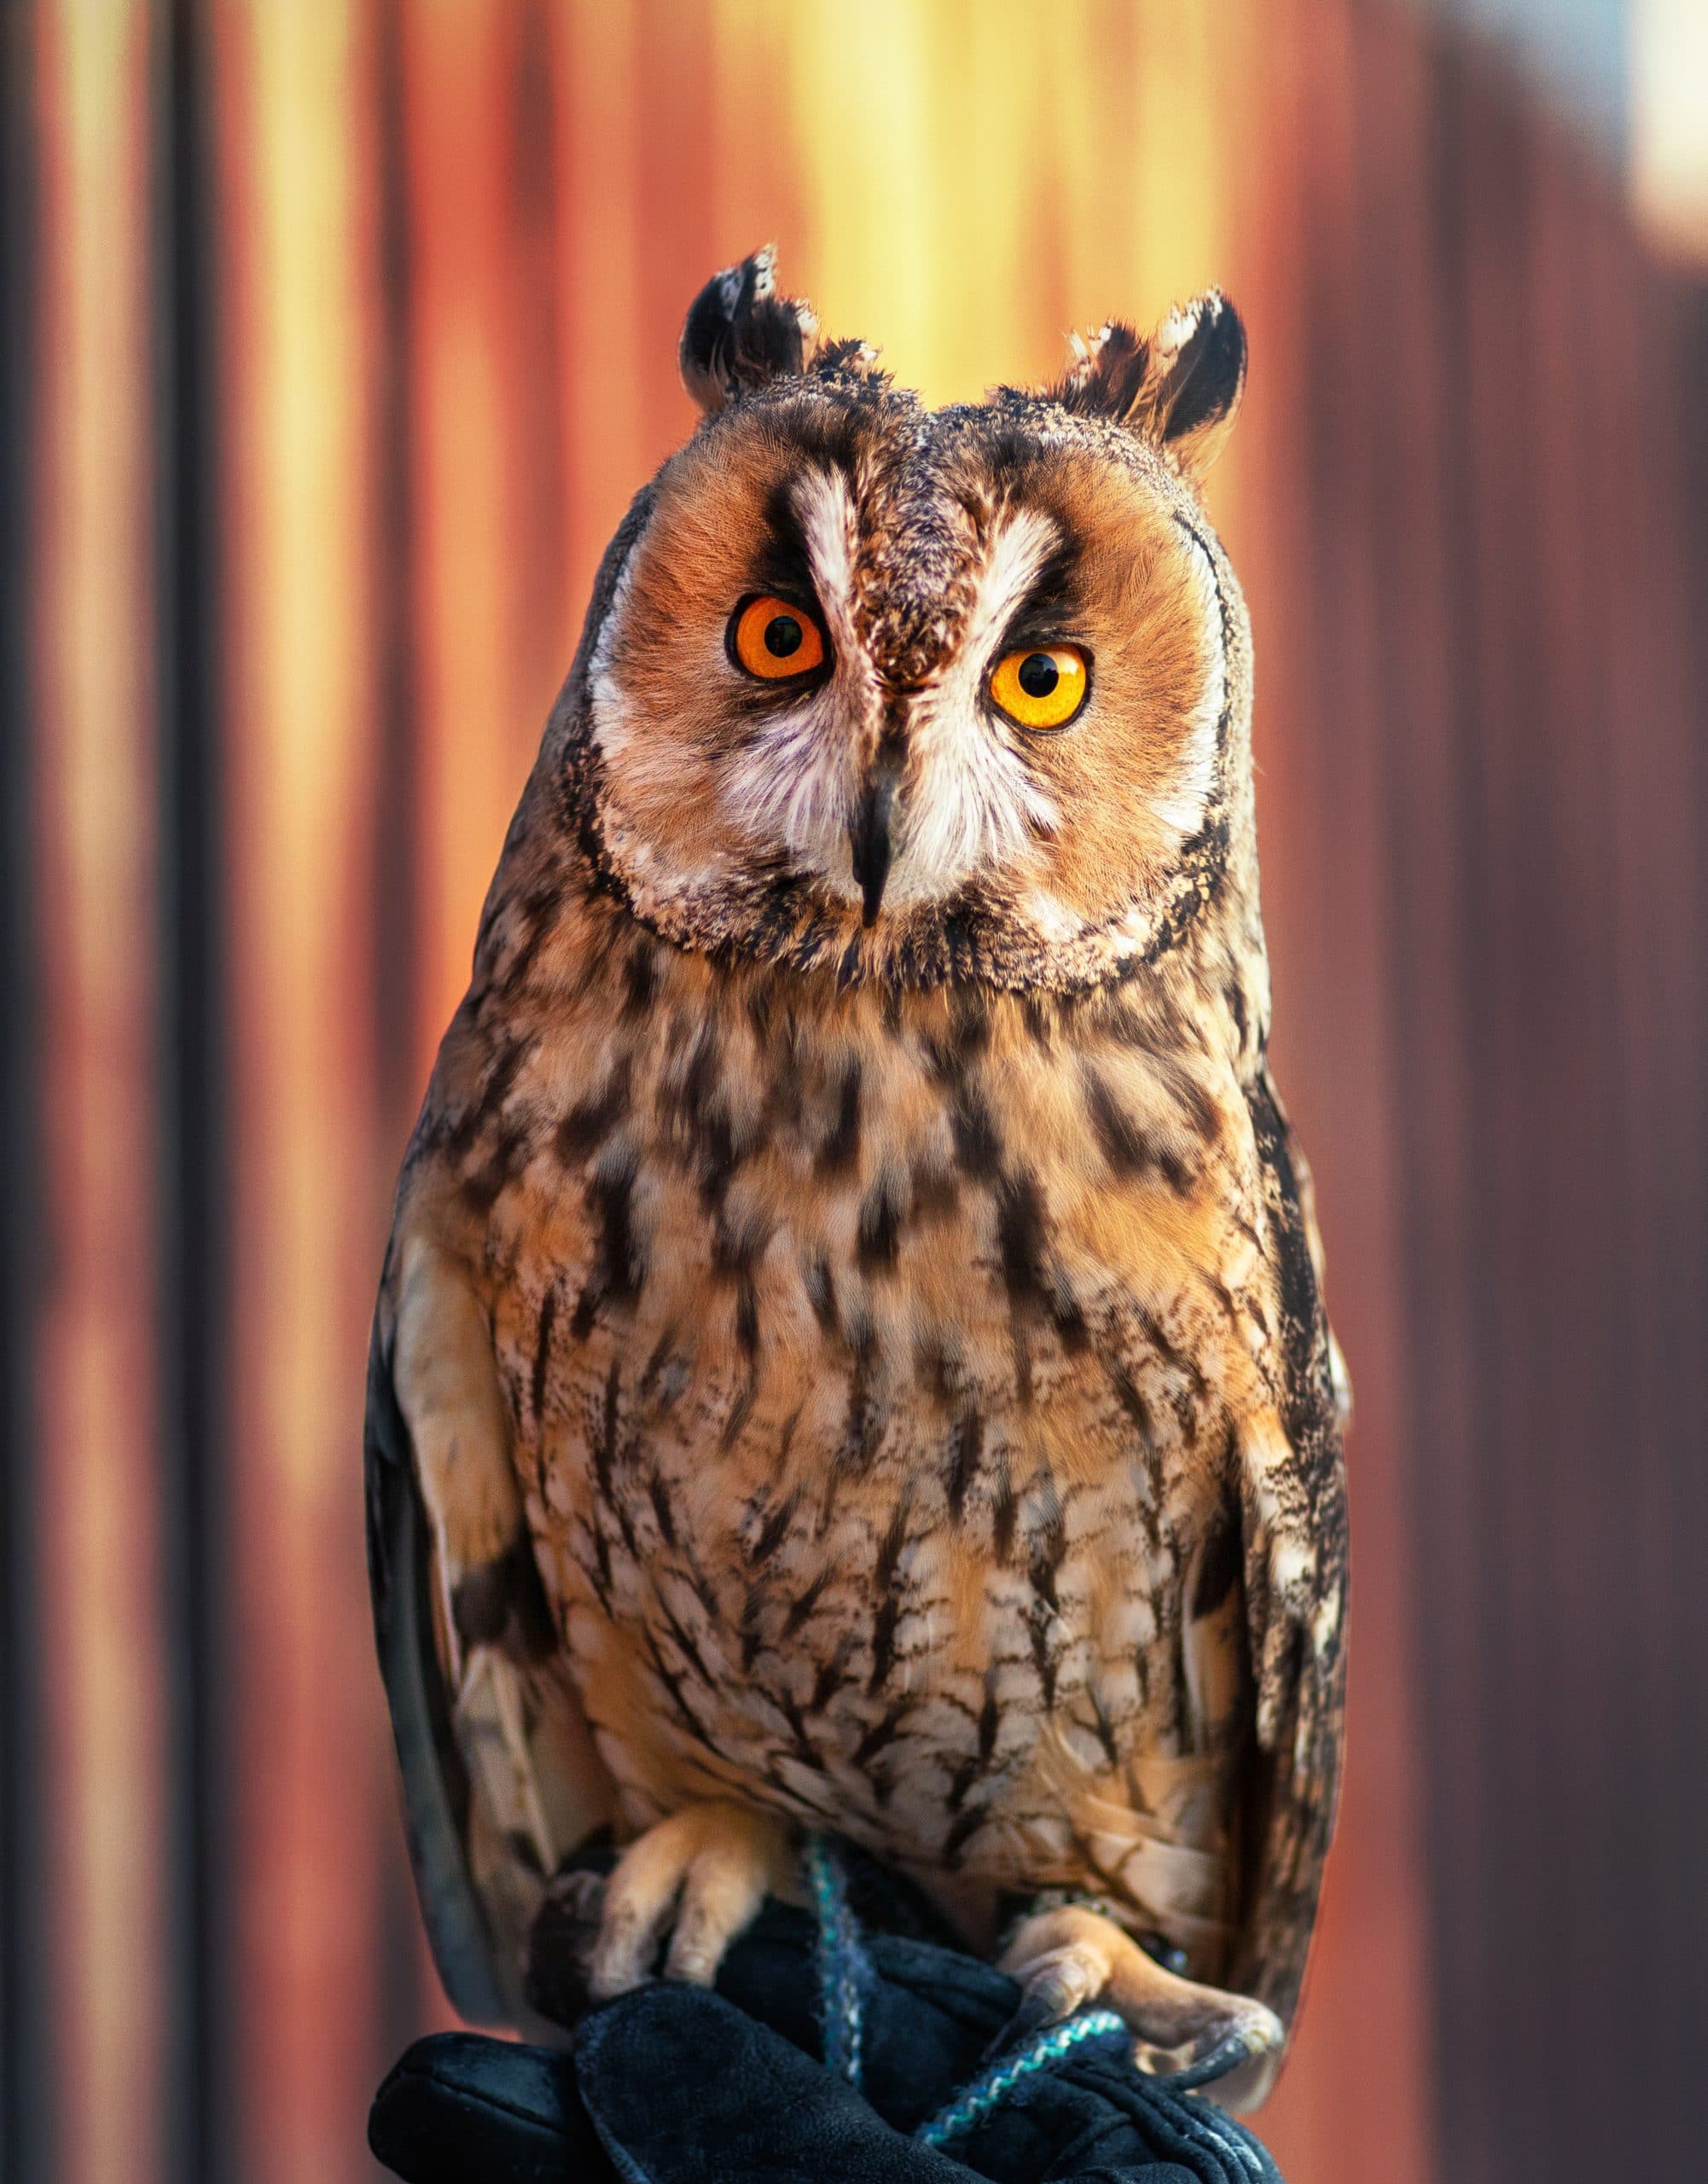 Photo of an owl sat on a gloved hand looking straight ahead, as if looking at the photographer